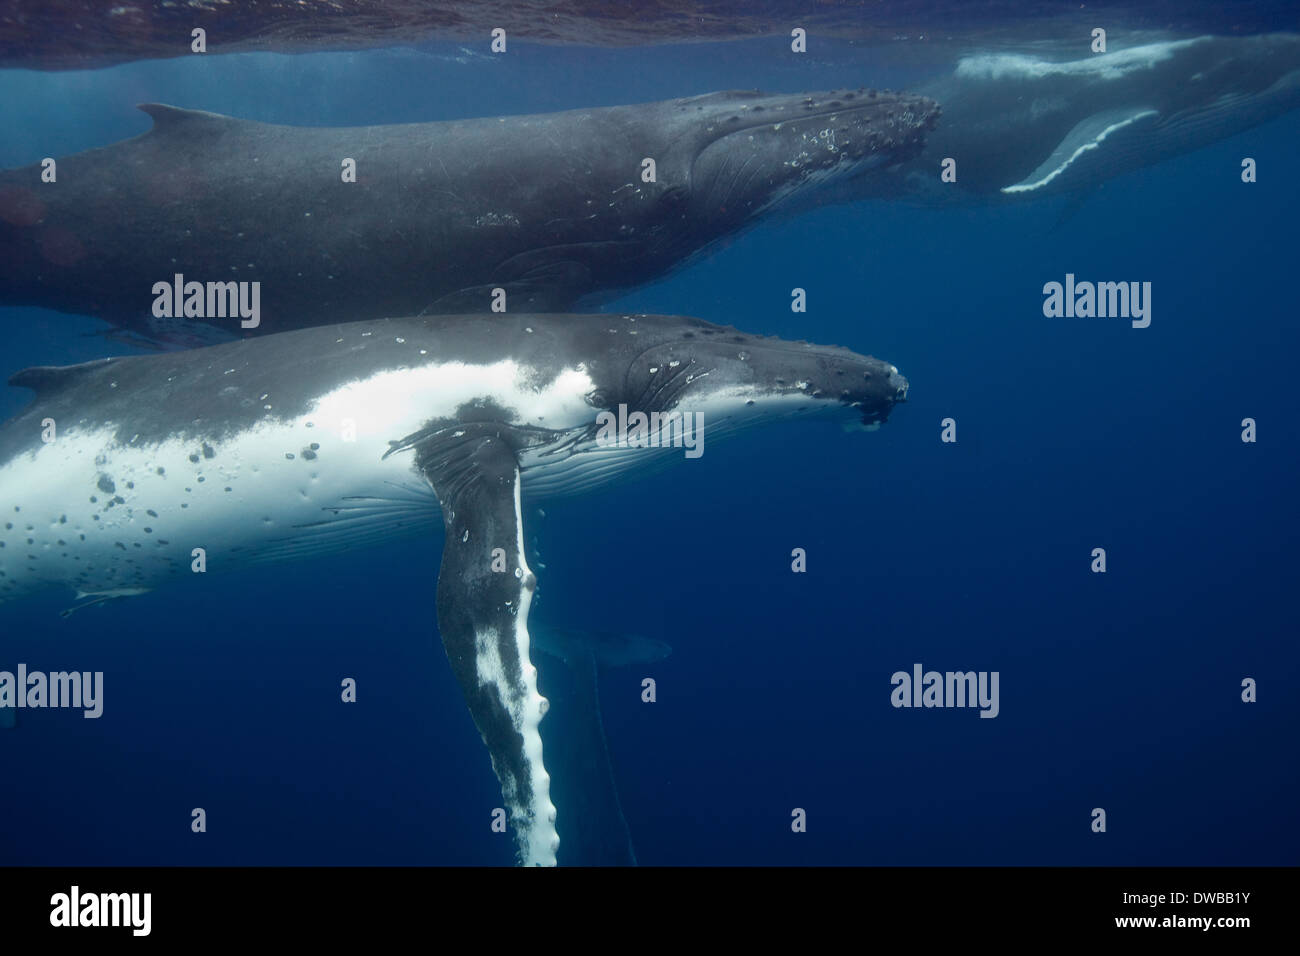 Underwater view Humpback whales. Stock Photo